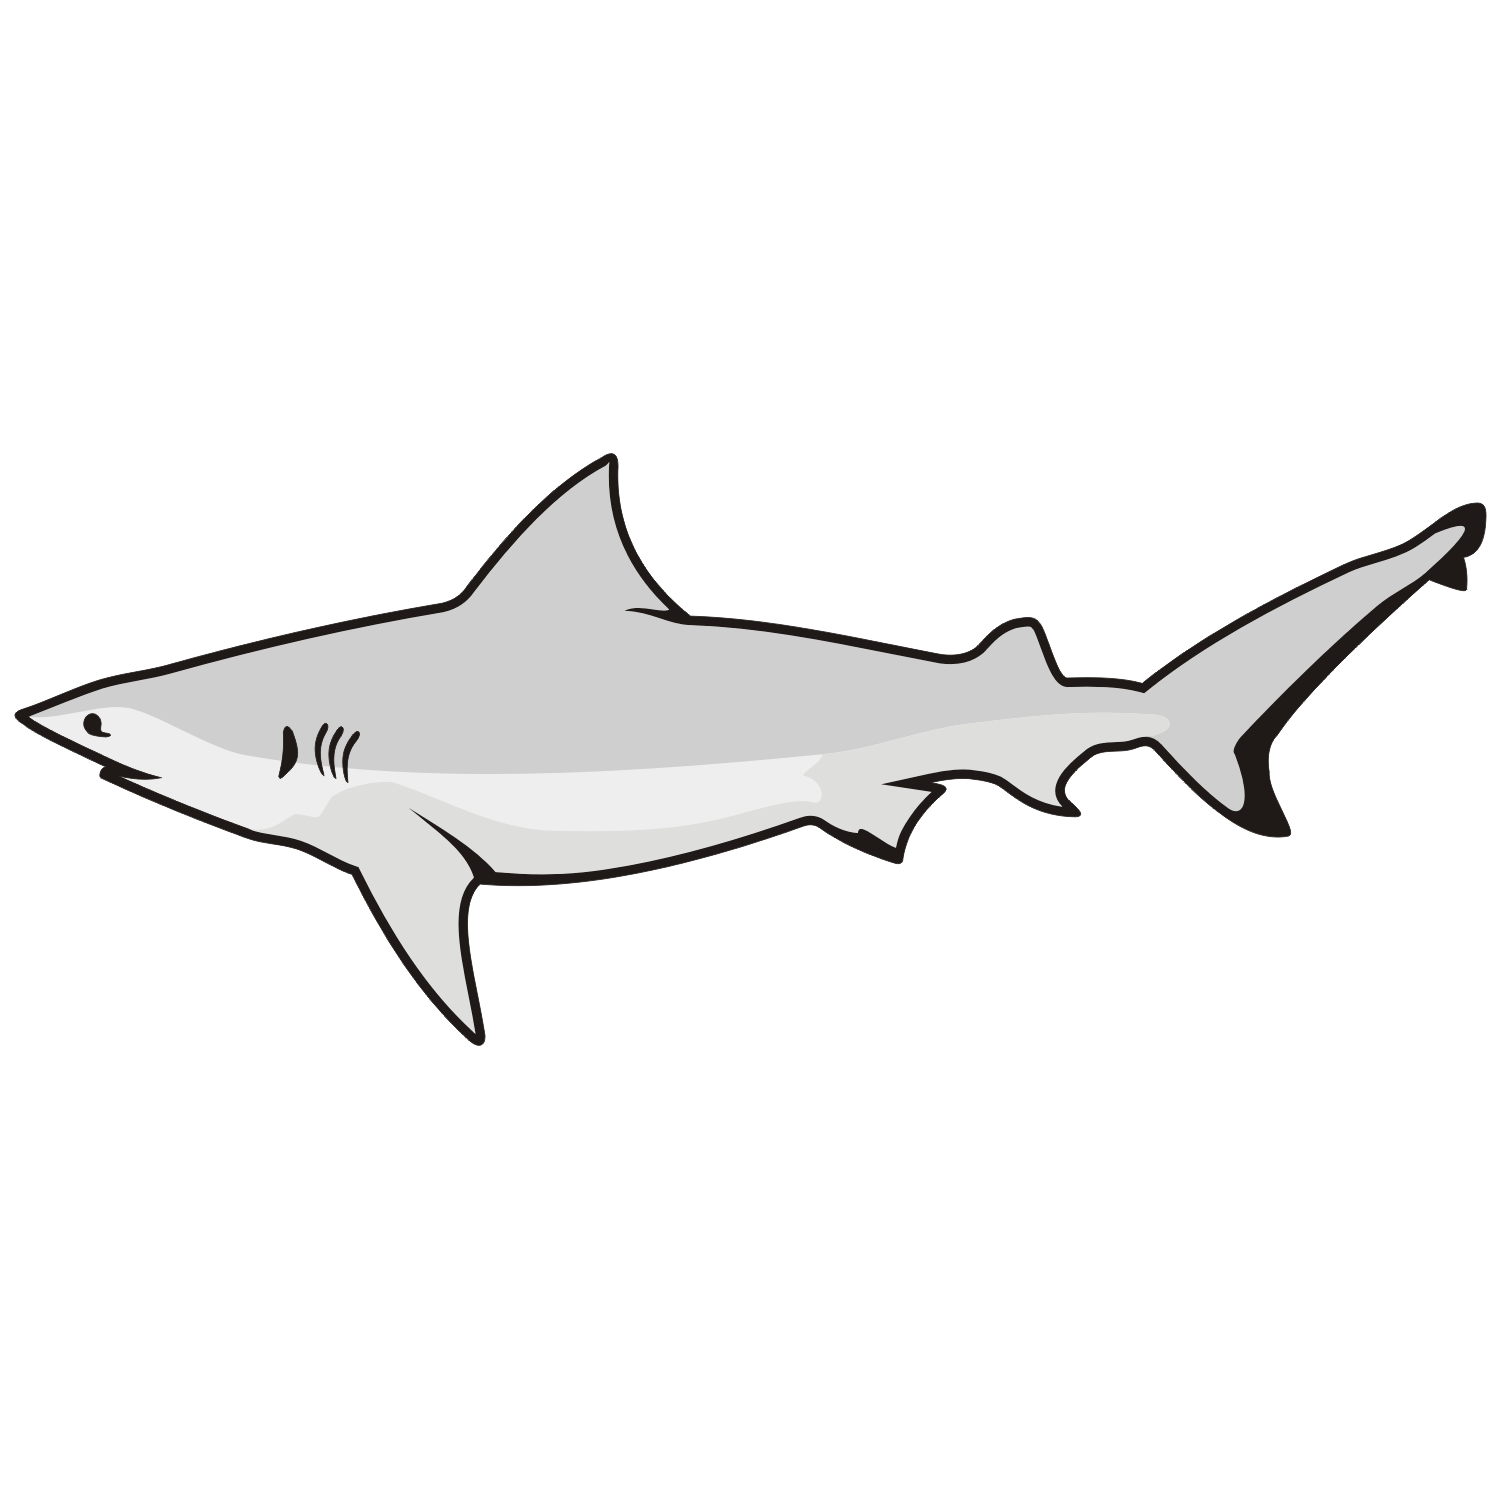 Vector for free use: Great white shark - ClipArt Best - ClipArt Best